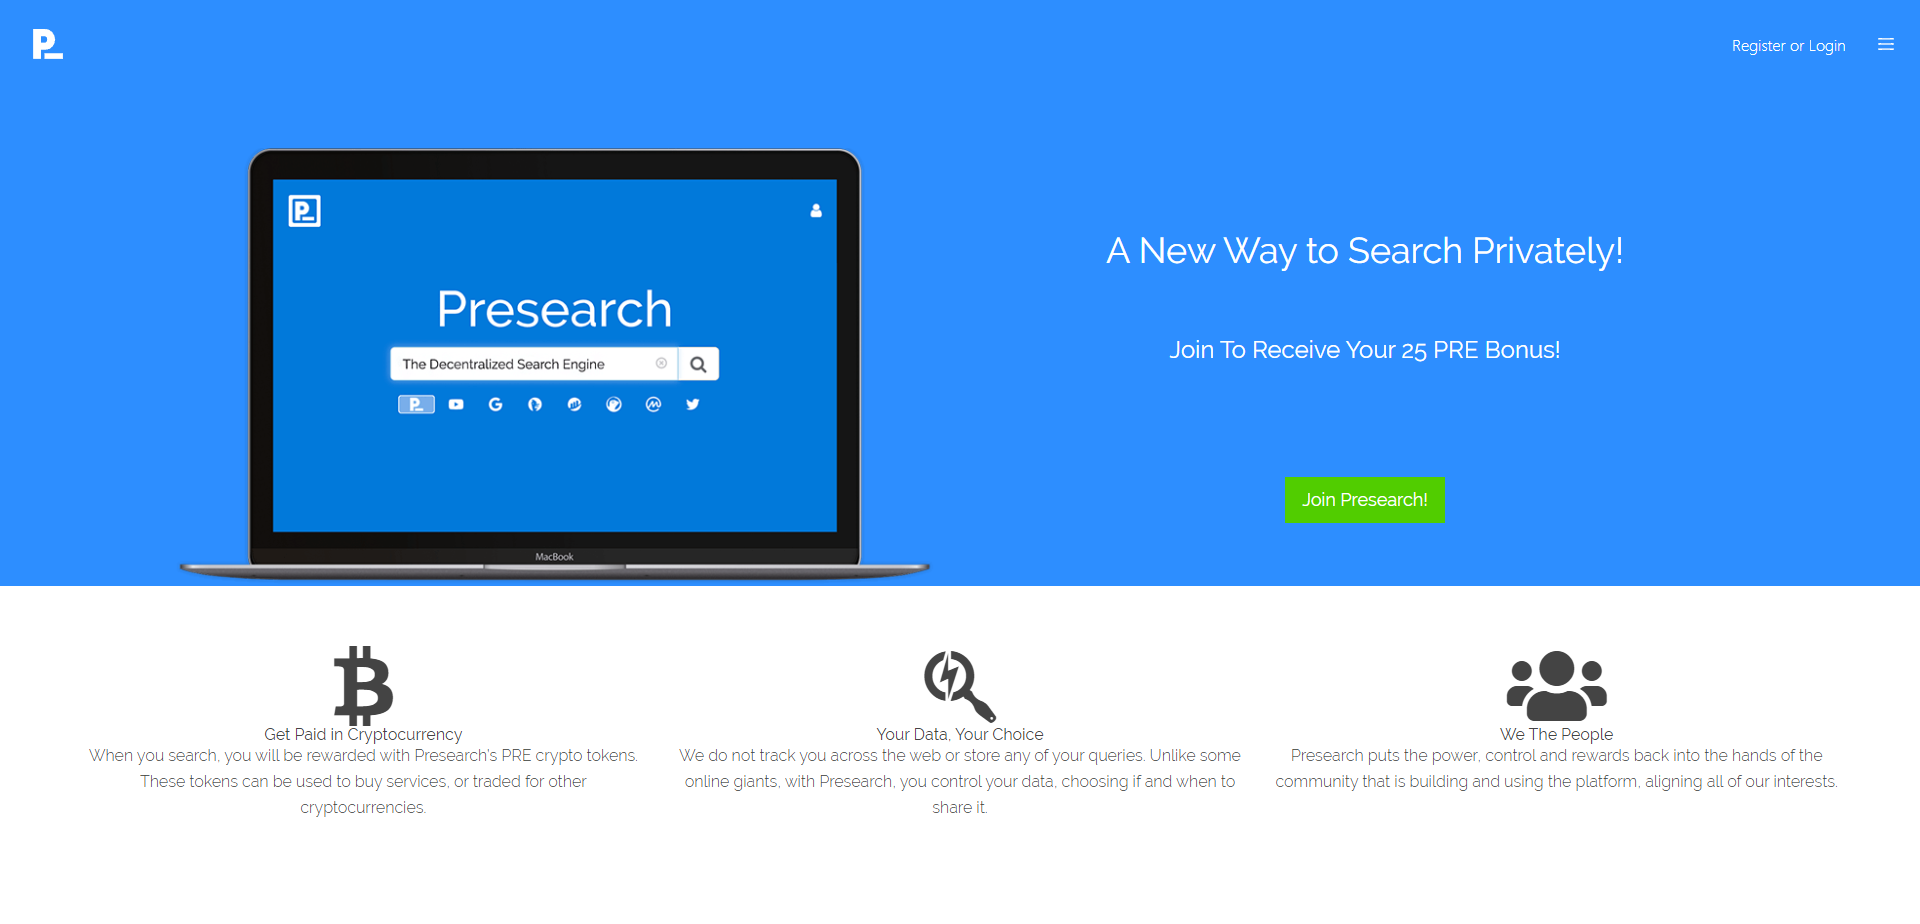 Landing Page for Presearch